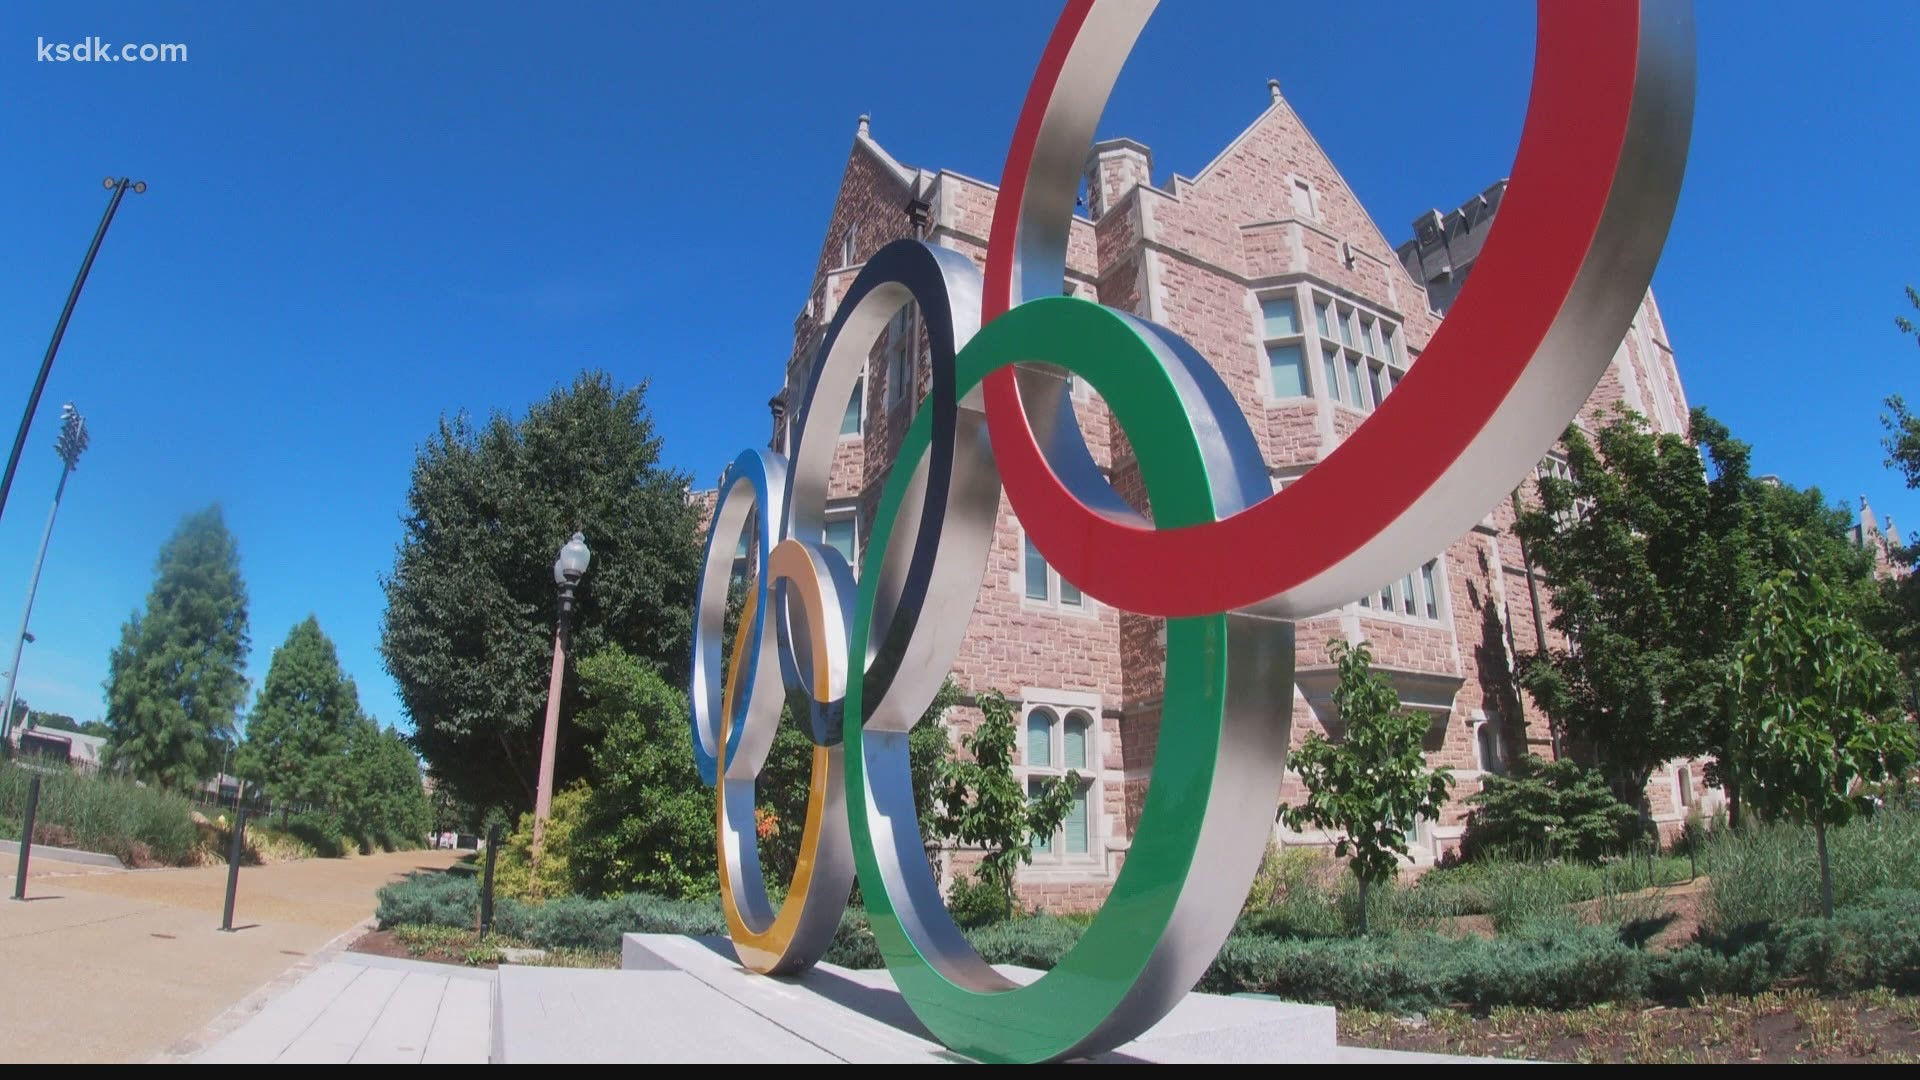 Ewell Hechting trog WashU displays Olympic rings for St. Louis area | ksdk.com